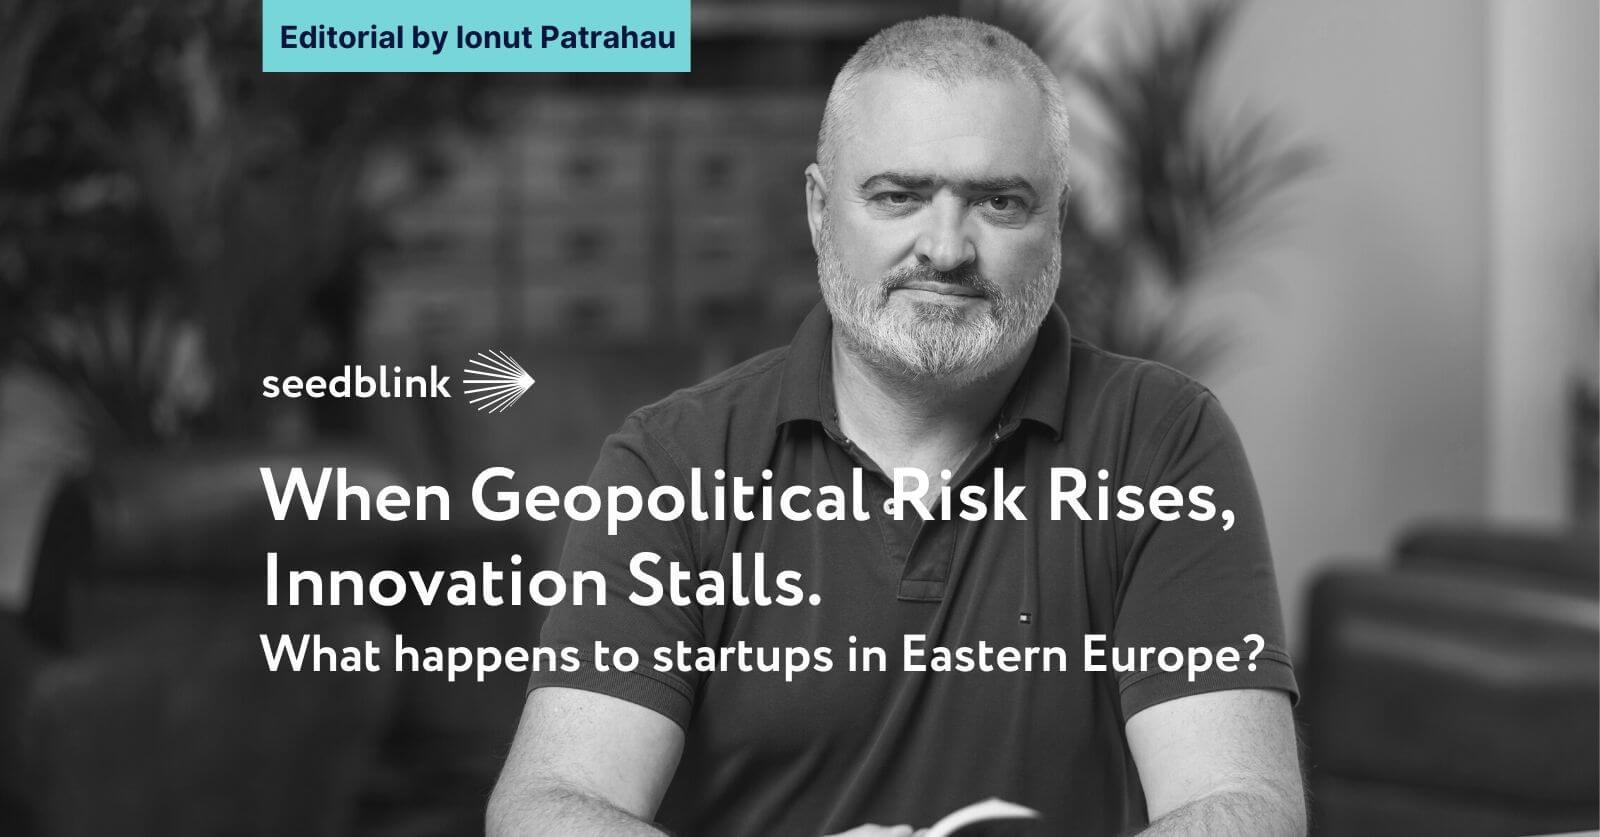 When Geopolitical Risk Rises, Innovation Stalls. What happens to startups in Eastern Europe?